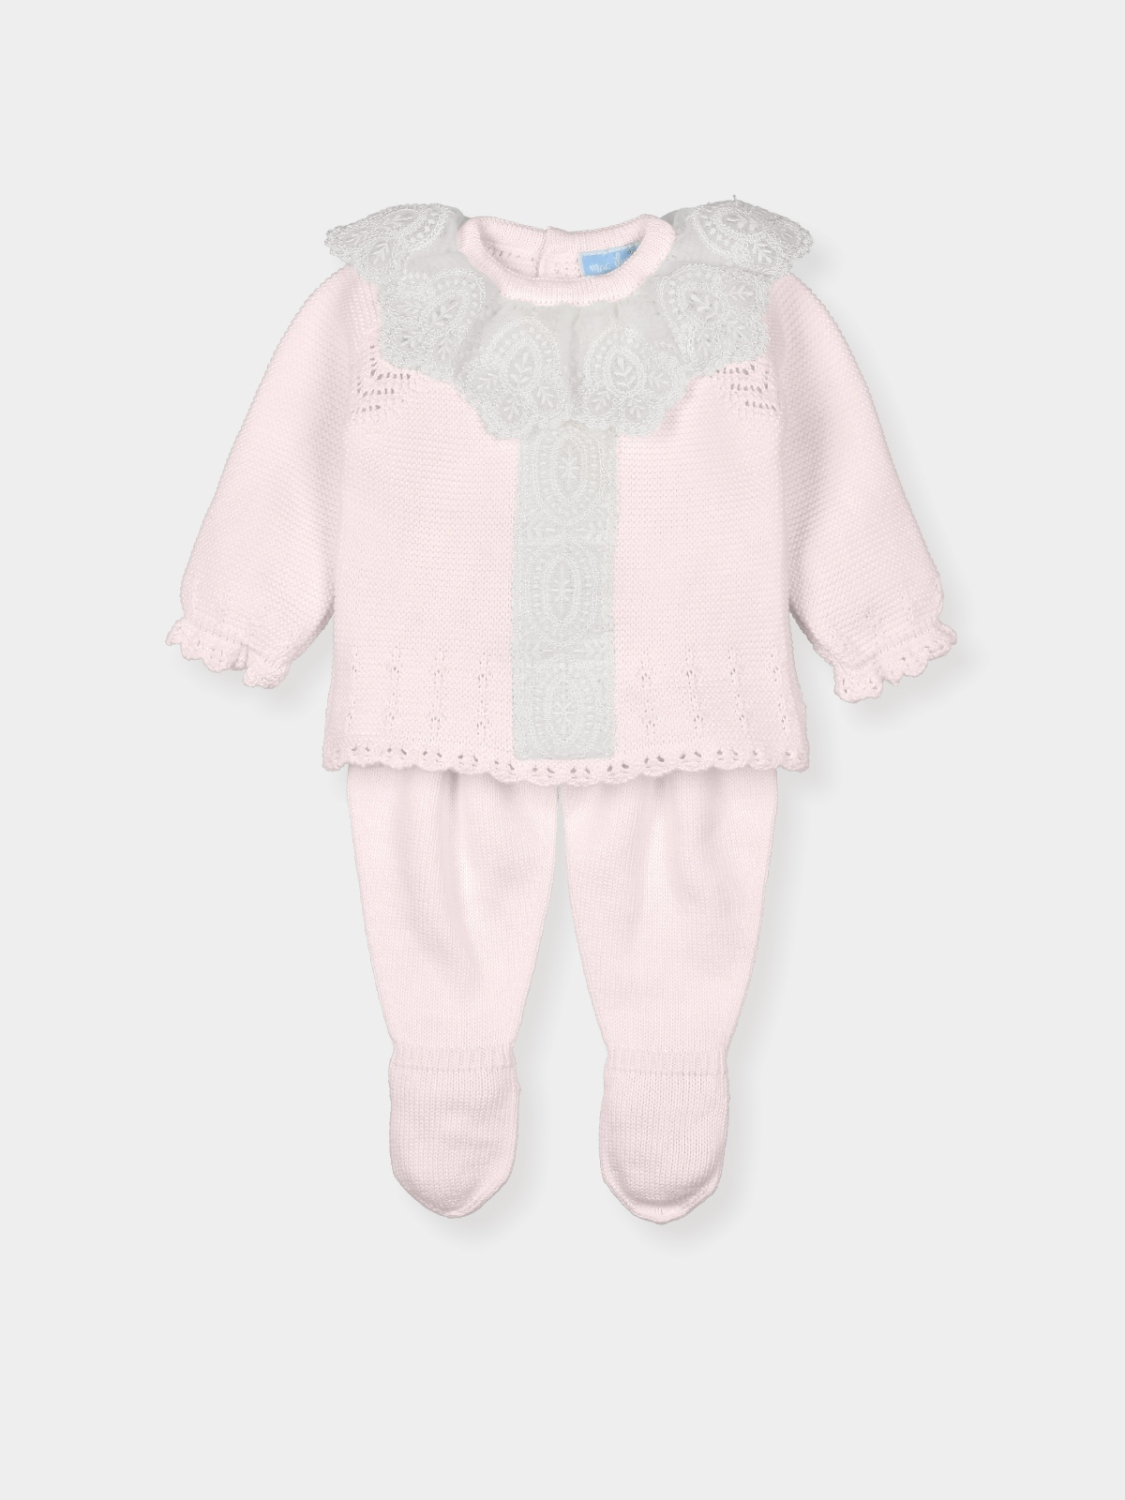 Baby Pink Lace love outfit